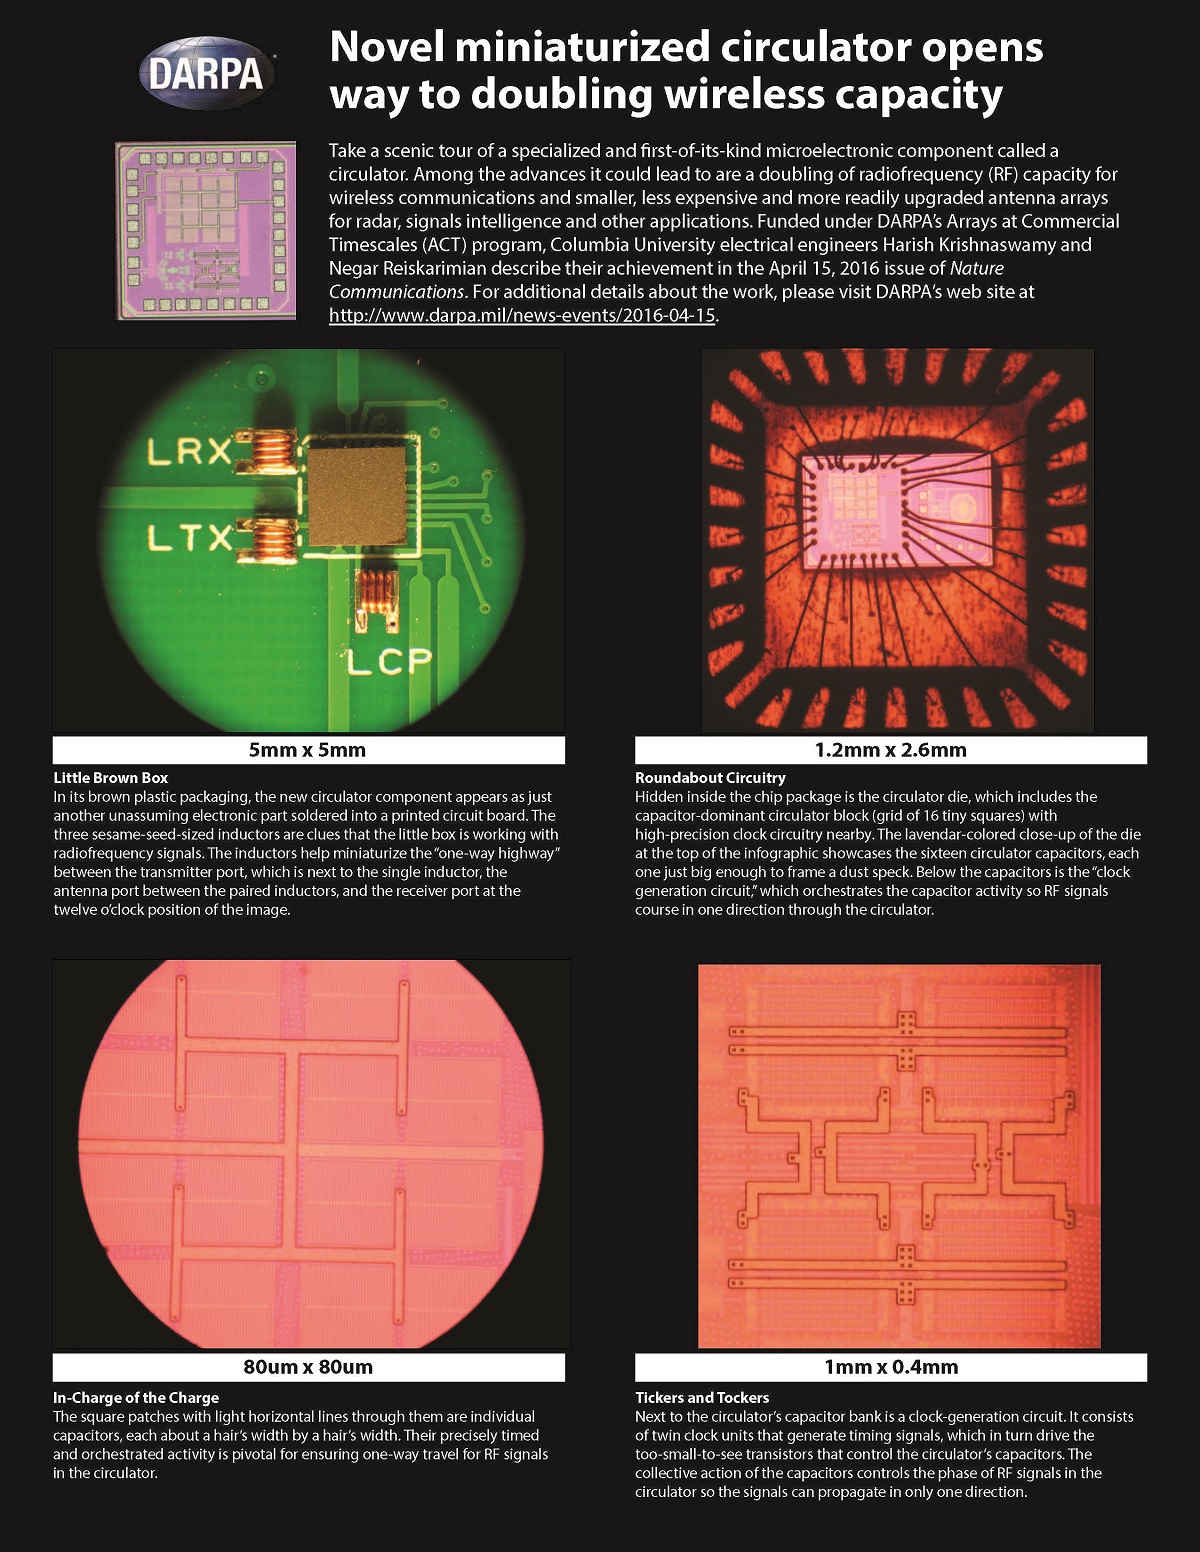 <p> Take a short tour under the hood of a newly miniaturized electronic component, a circulator, which could add technology-advancing finesse to the way radiofrequency signals travel within chips. Click <a href="http://www.darpa.mil/attachments/CirculatorGraphic.pdf" alt='Link will open in a new window.' target='whole'> here</a>. DARPA image</p>
 
